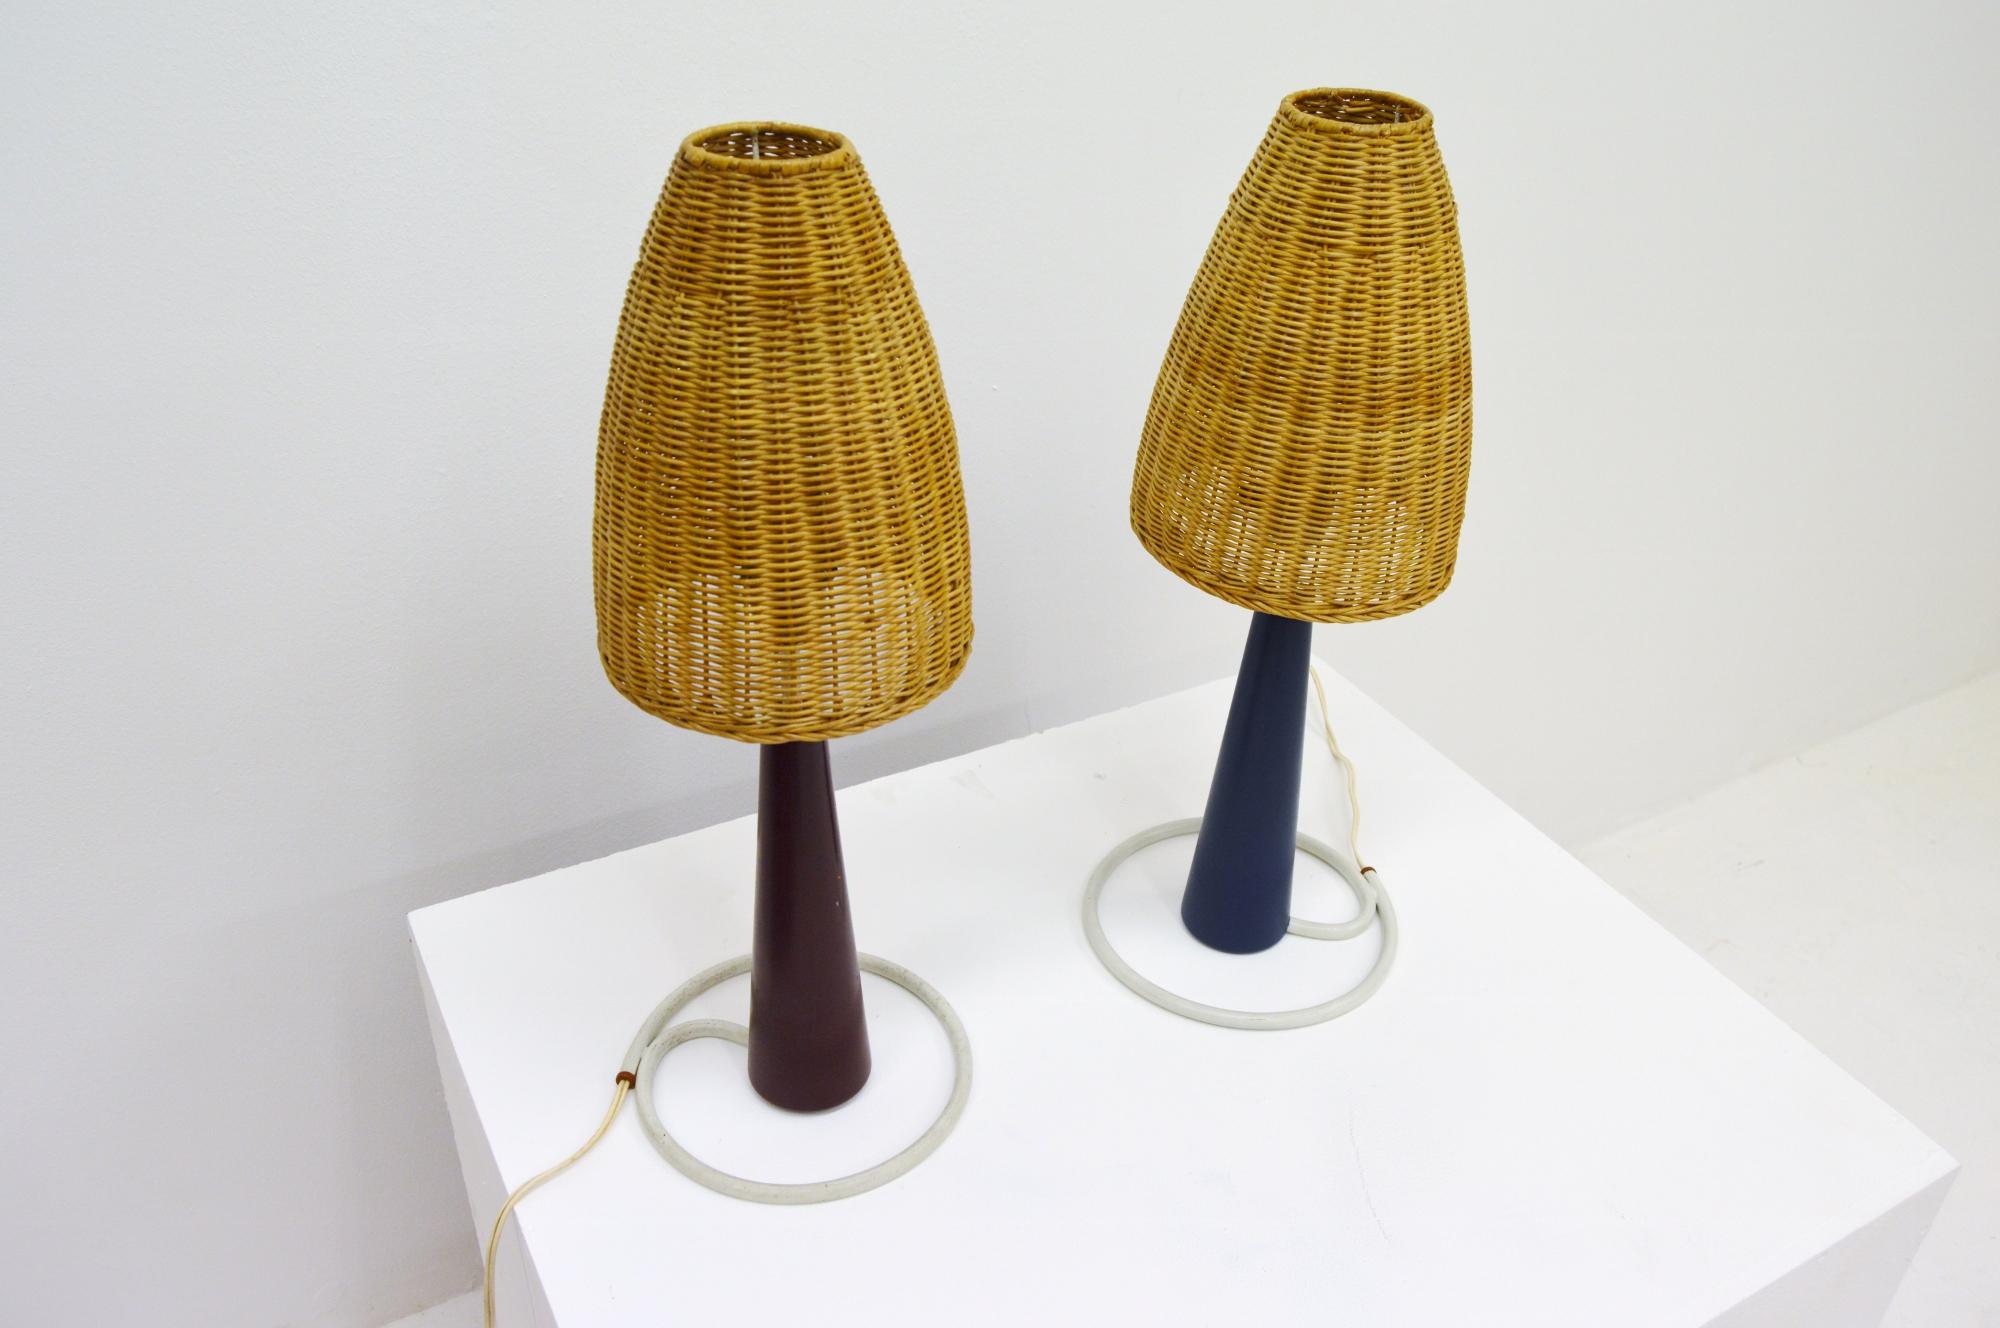 Rare pair of table lamps manufactured by Bergboms marked Bergbom B-08.
One red and one blue.
White lacquered metal and lacqered wood. Lamp shades of wooden rattan/ cane.
Both have their original European electricity left, which works. We can